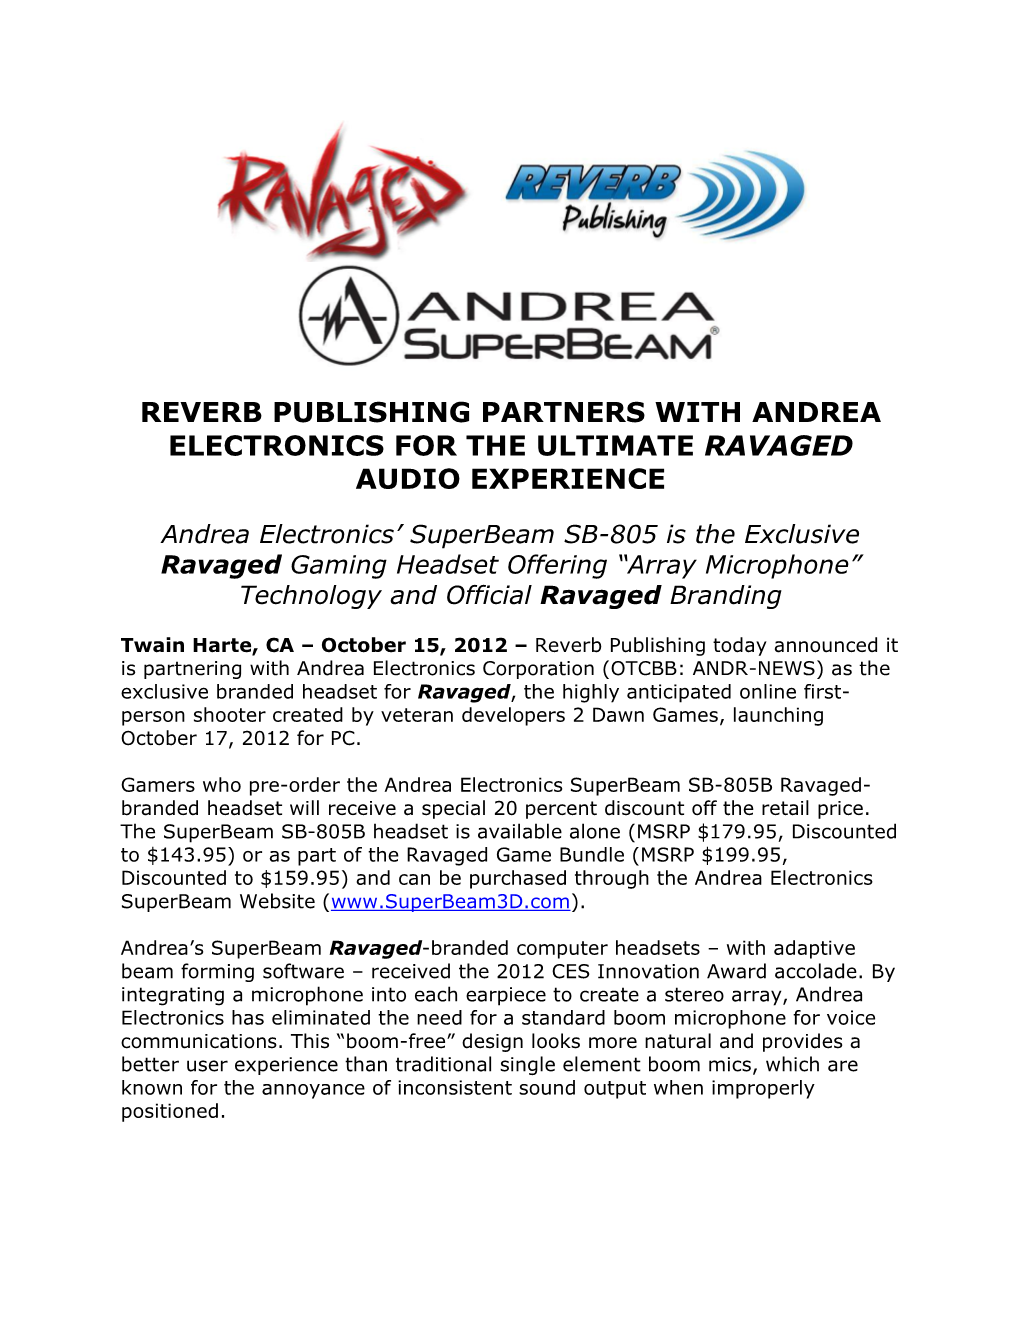 Reverb Publishing Partners with Andrea Electronics for the Ultimate Ravaged Audio Experience